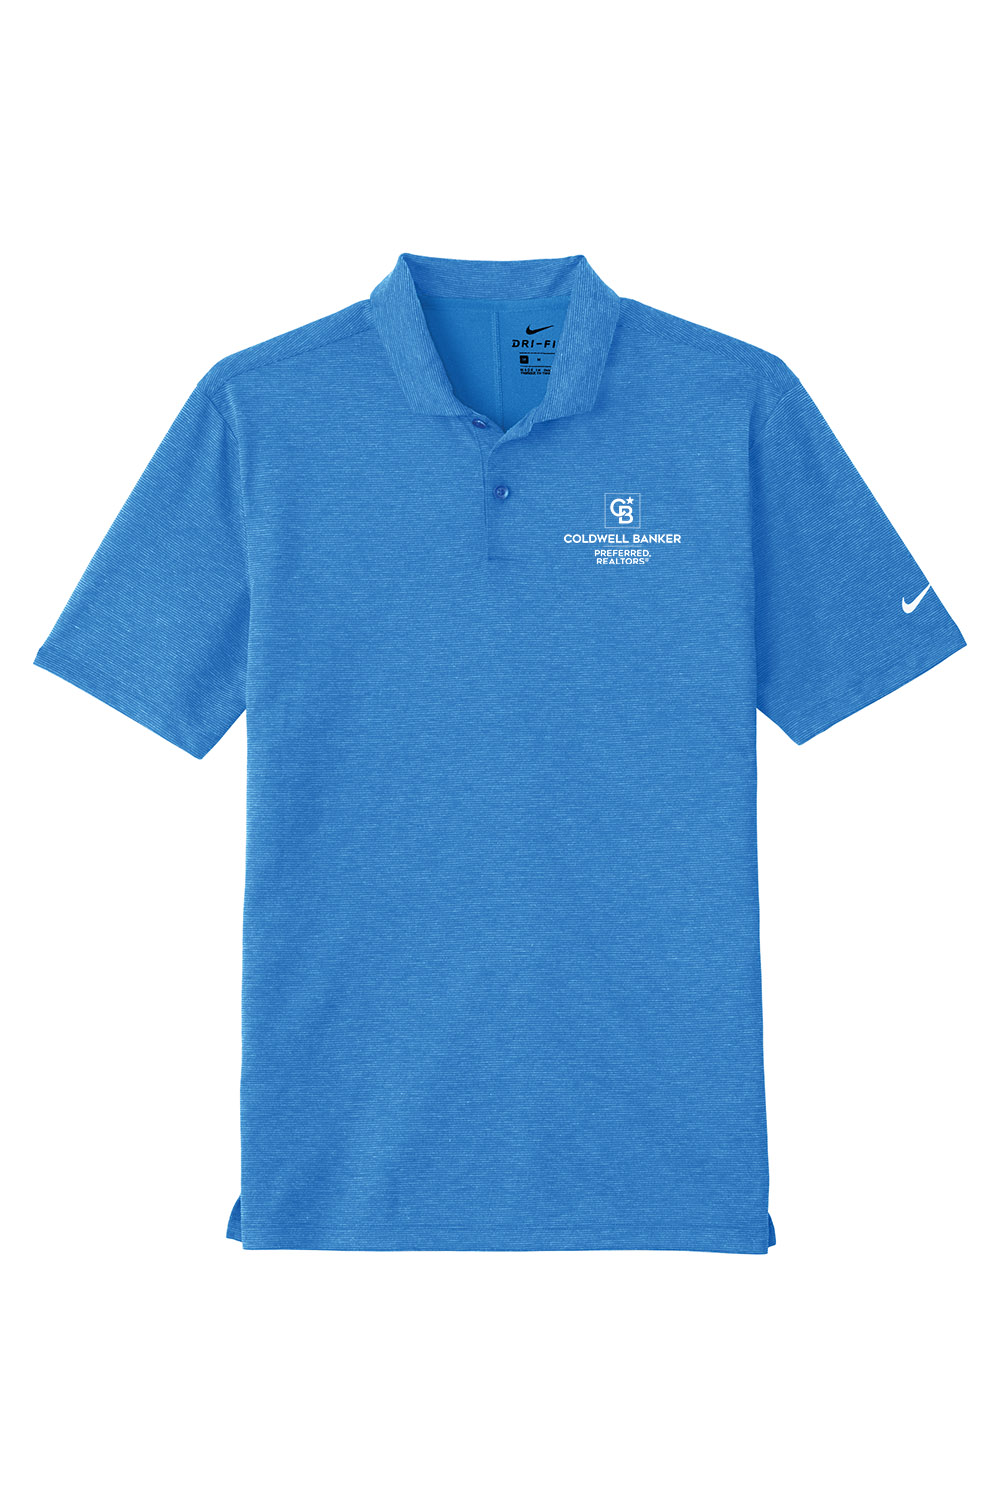 Nike Dri-Fit Prime Polo – Coldwell Banker Preferred Promotional Products